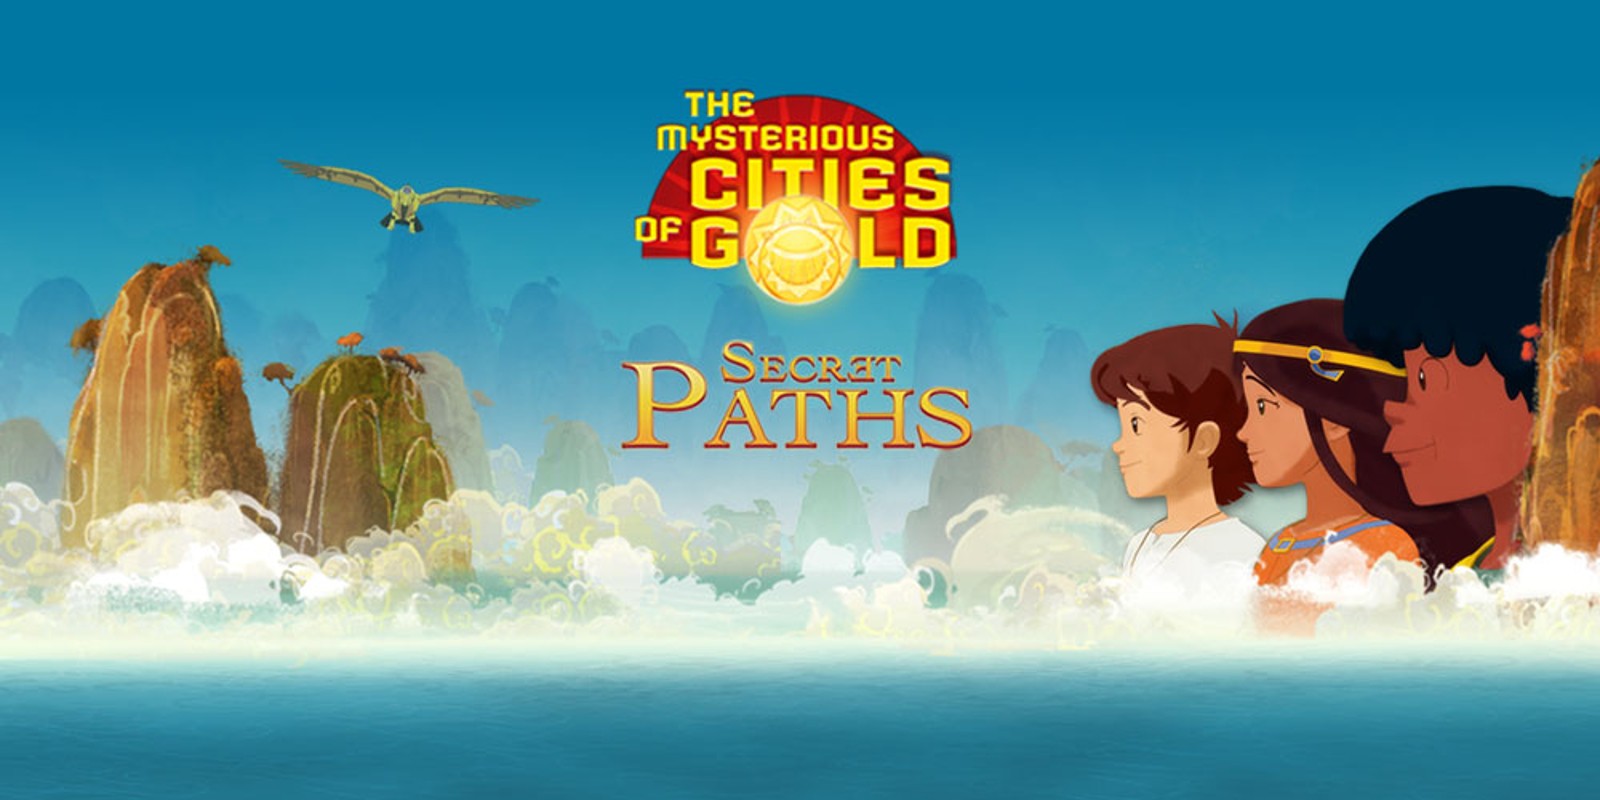 The Mysterious Cities of Gold: Secret Paths Review (Wii U eShop)